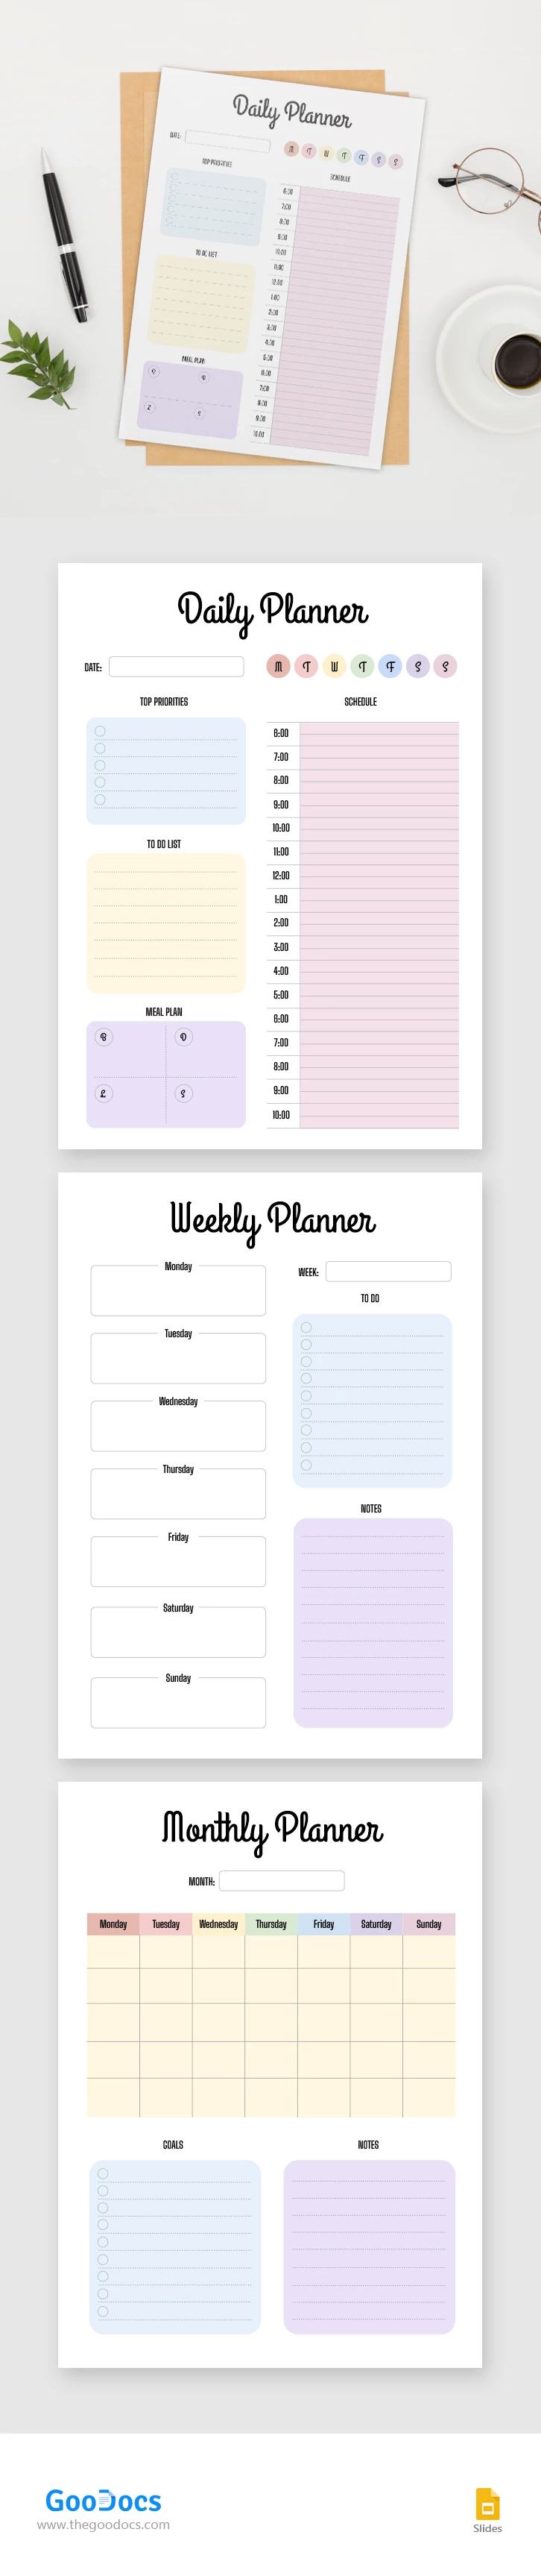 Family Planner - free Google Docs Template - 10066971